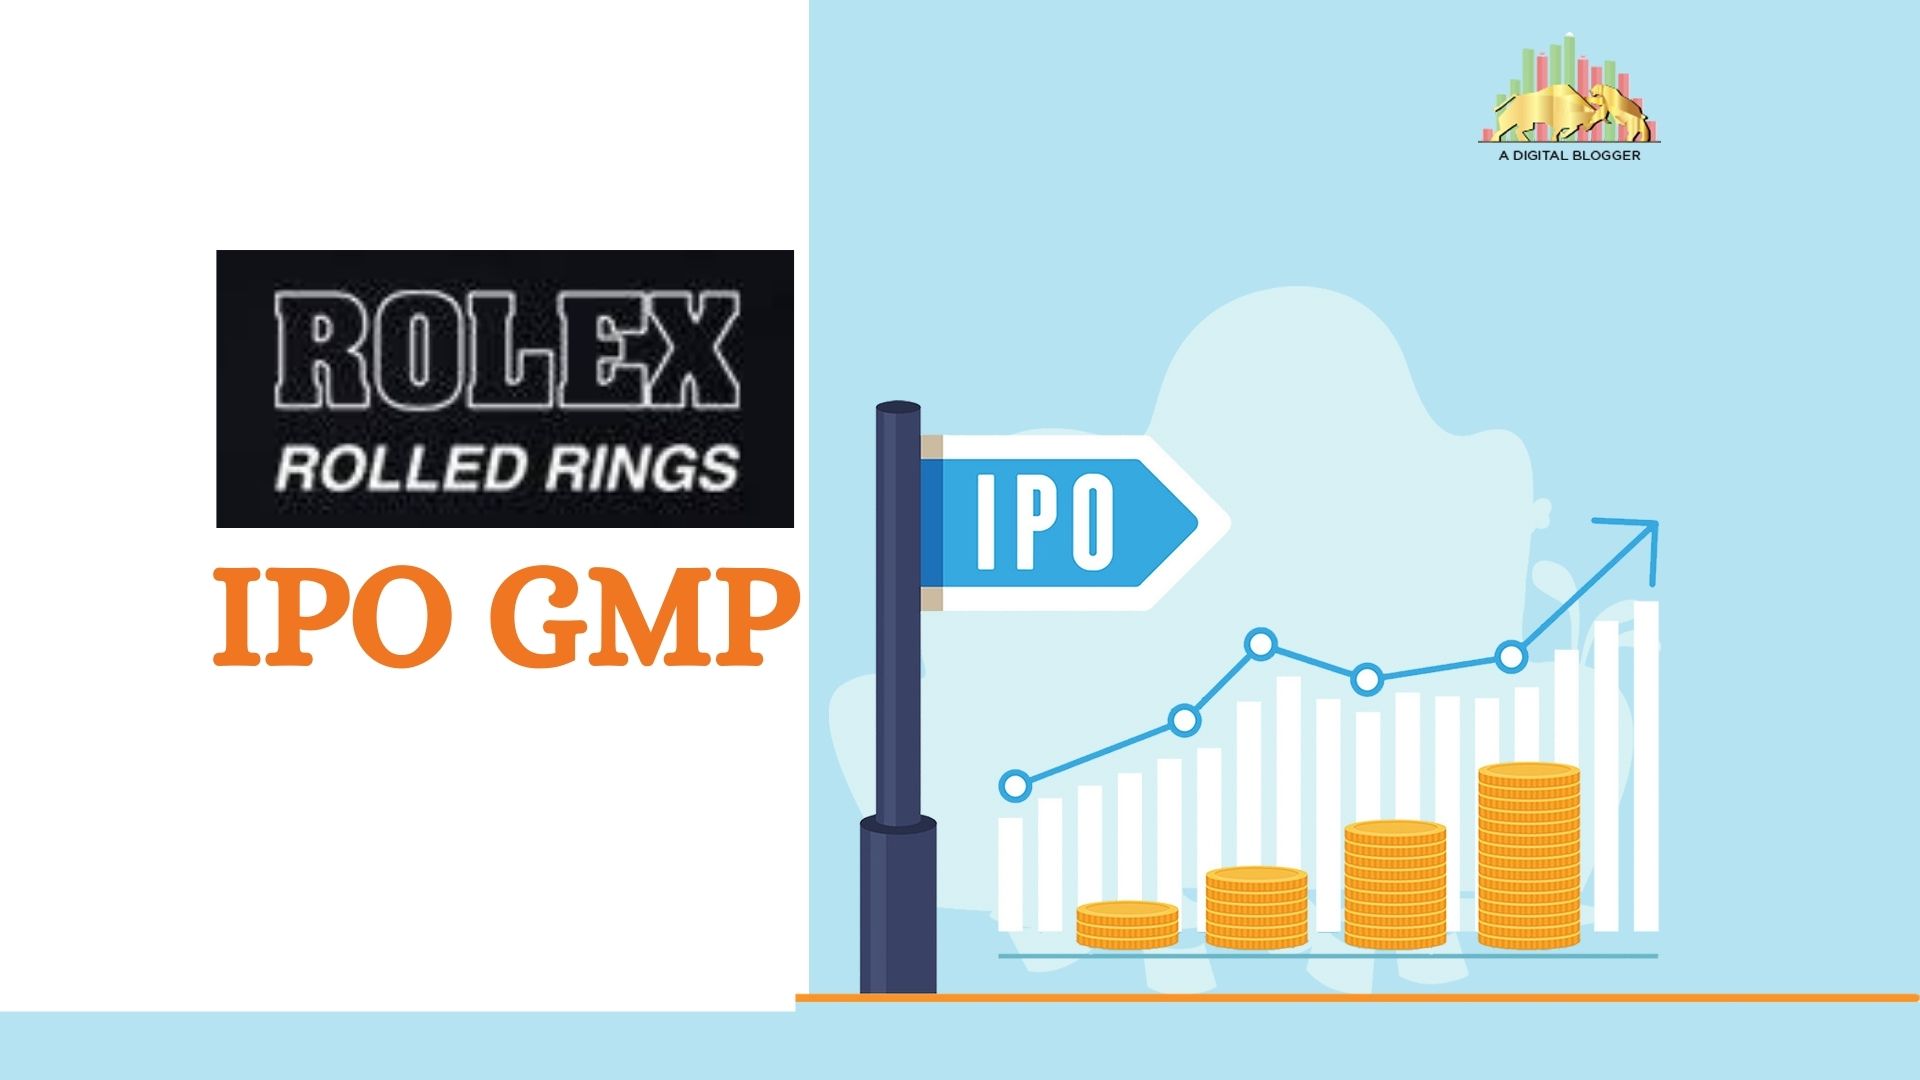 Rolex Rings IPO GMP